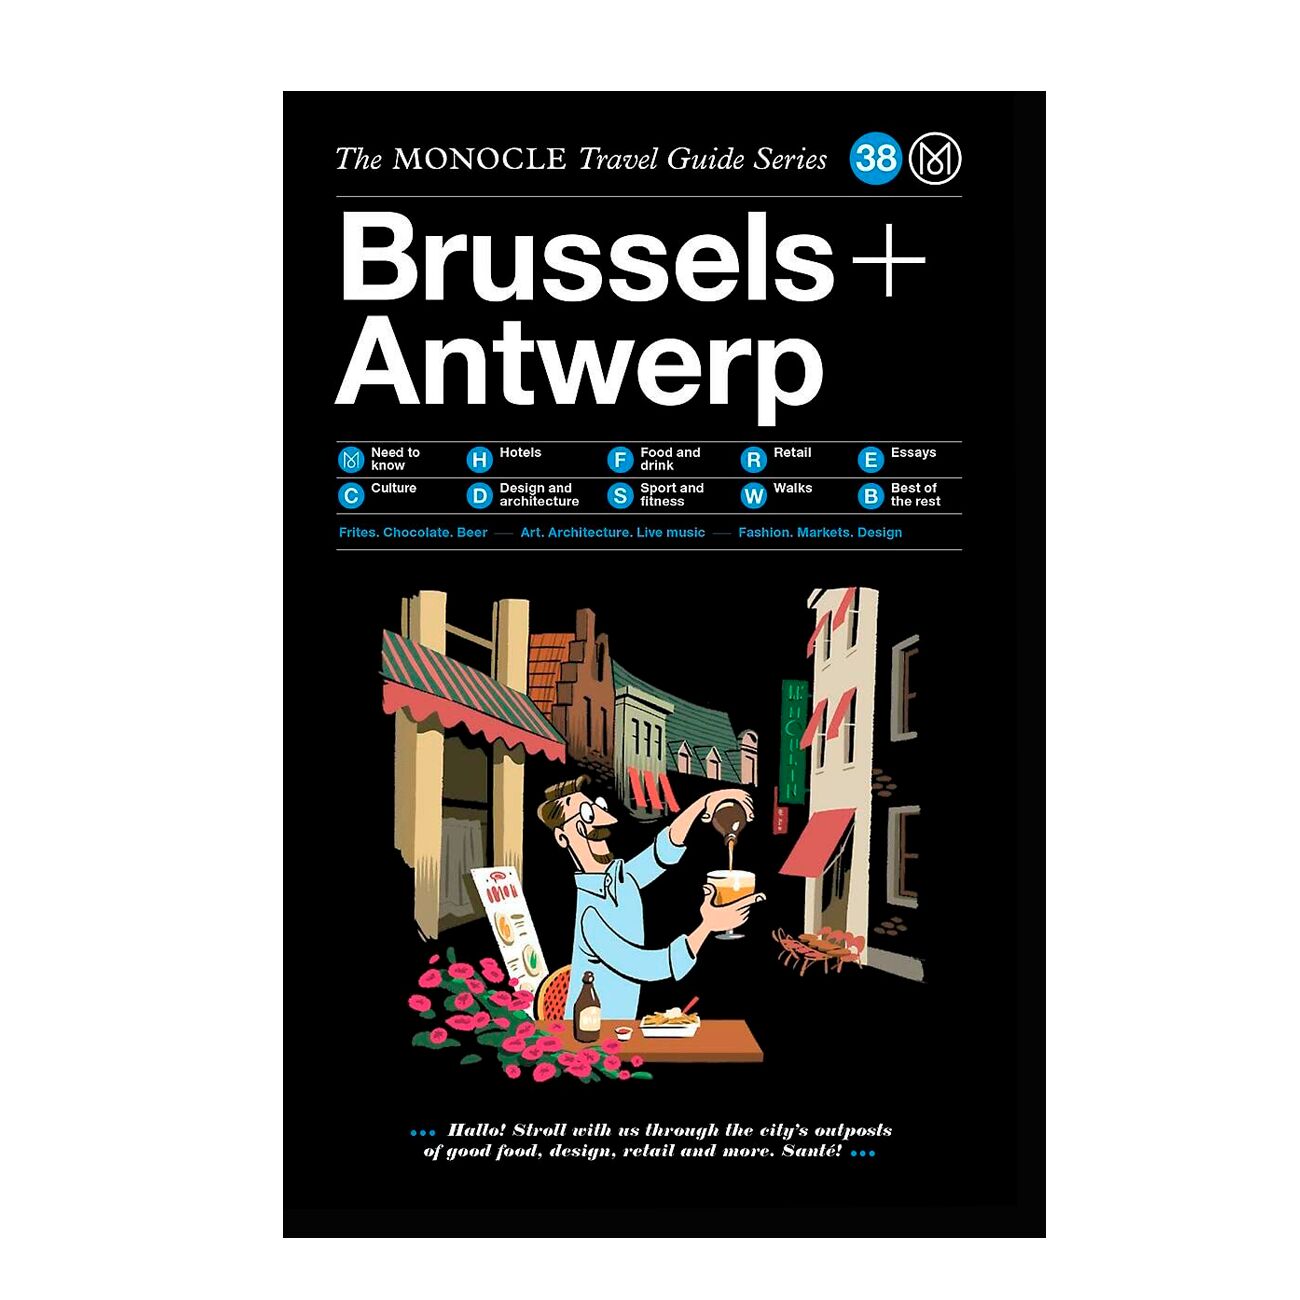 The Monocle Travel Guide to Brussels + Antwerp